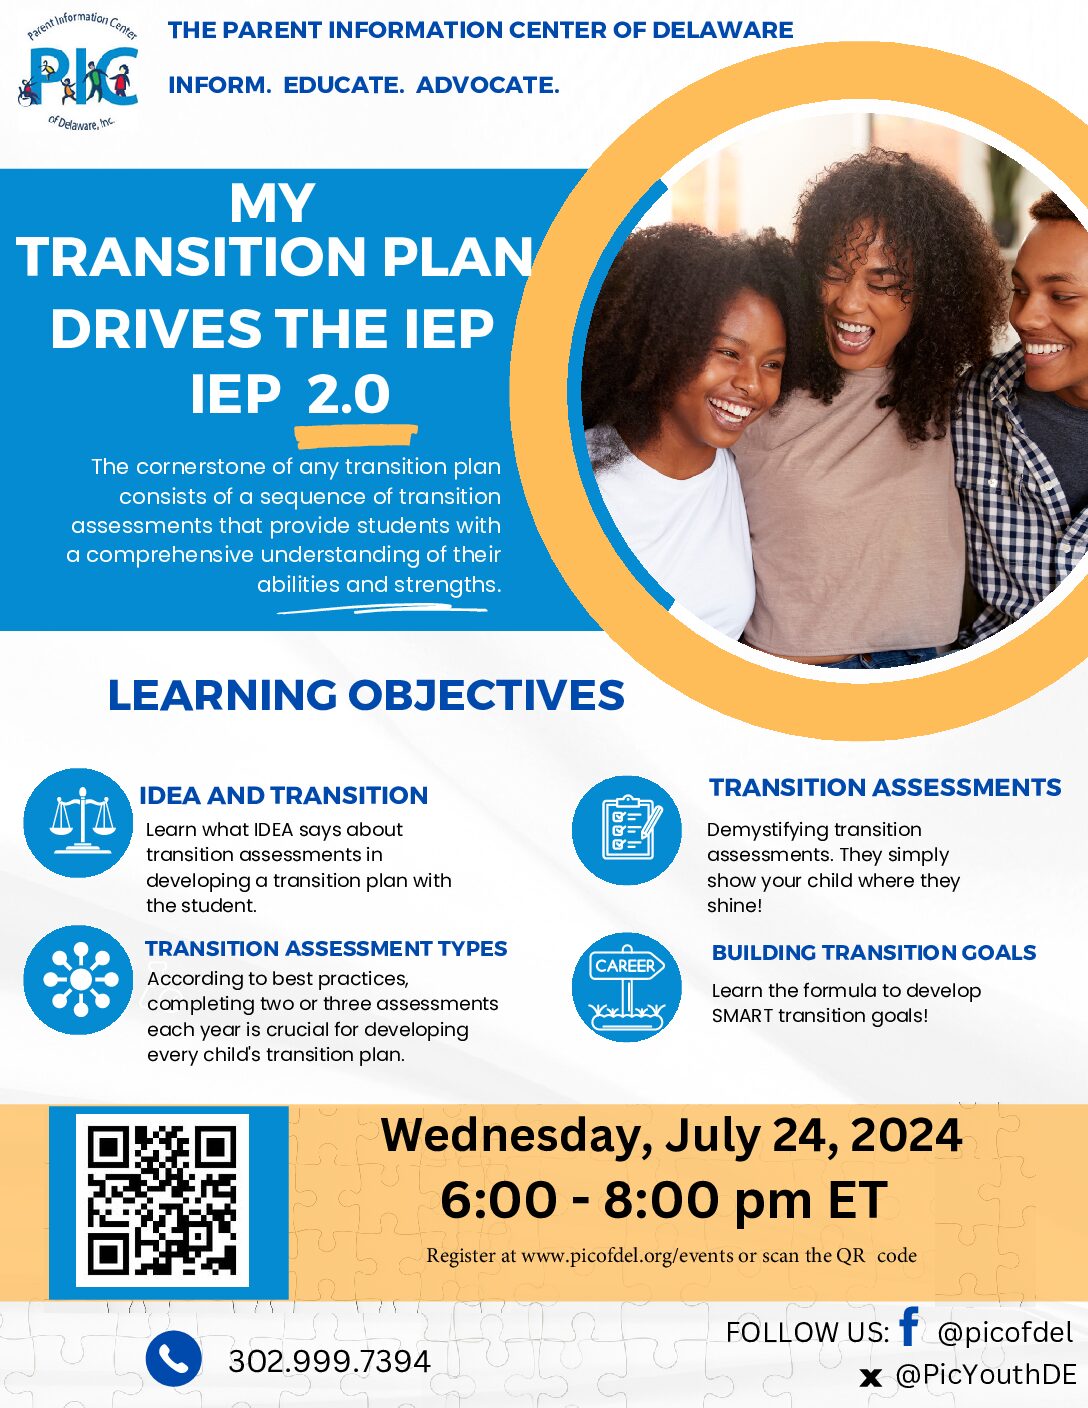 My Transition Plan Drive the IEP 2.0